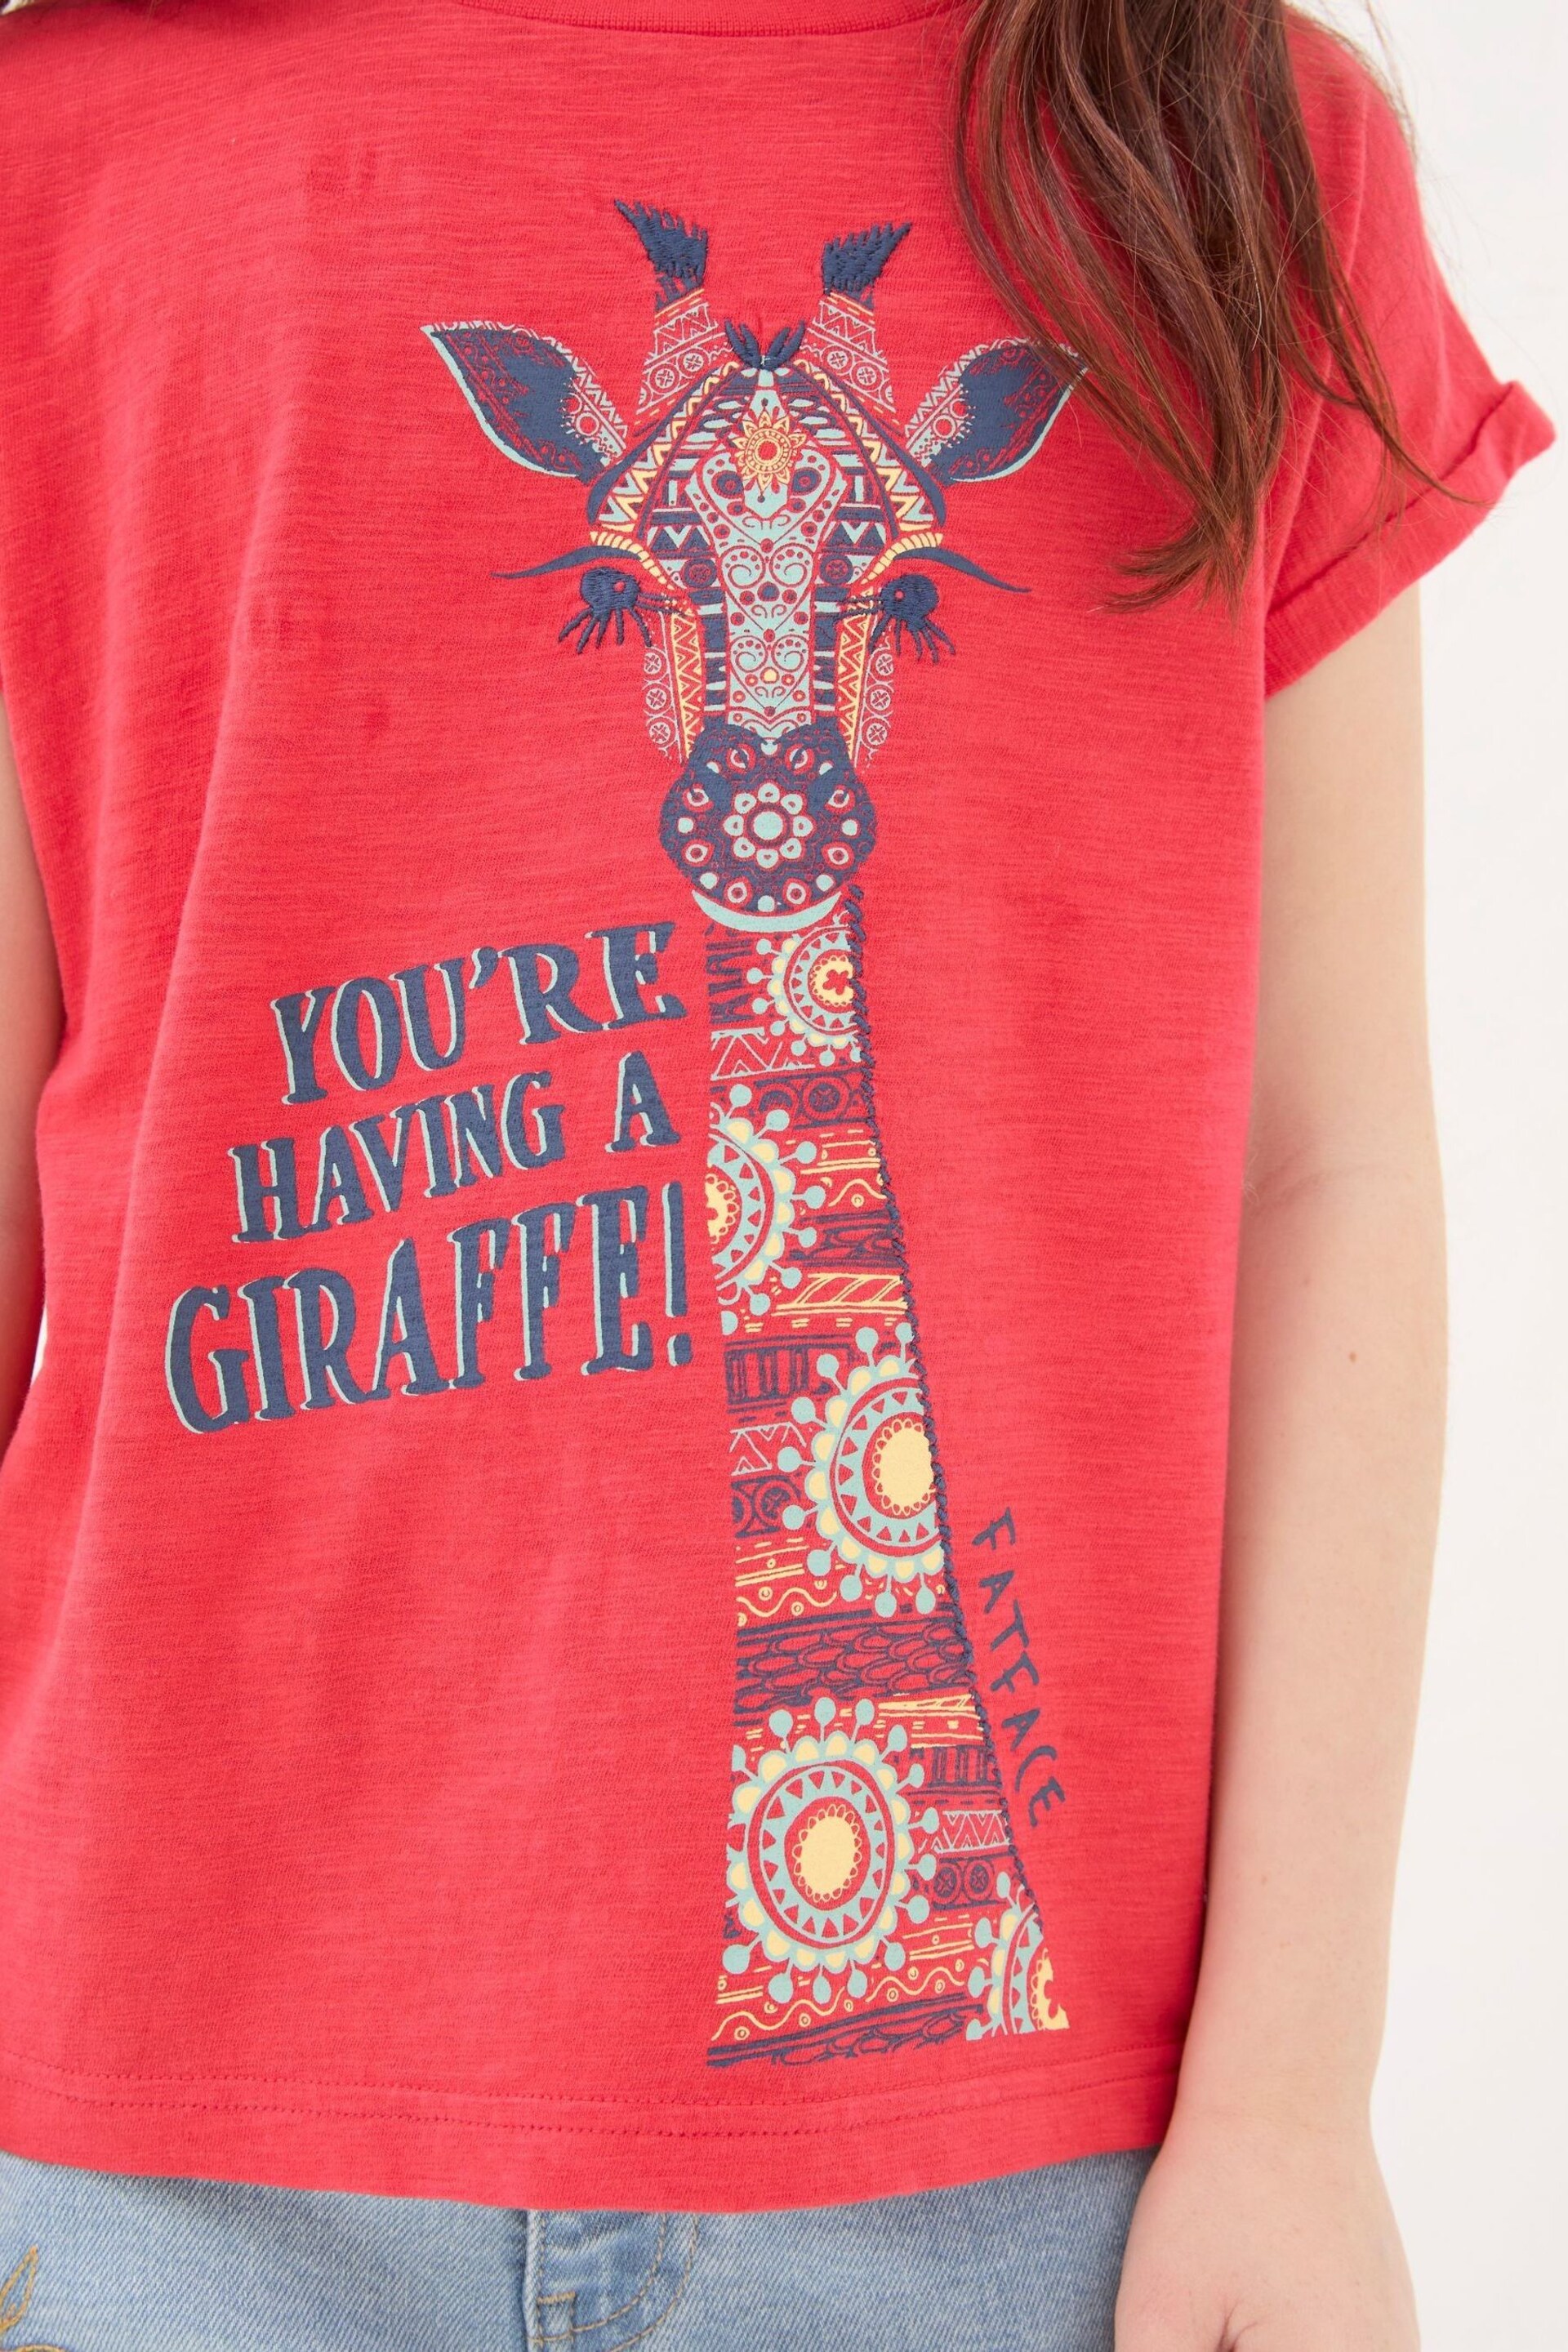 FatFace Red Creature Graphic T-Shirt - Image 4 of 5